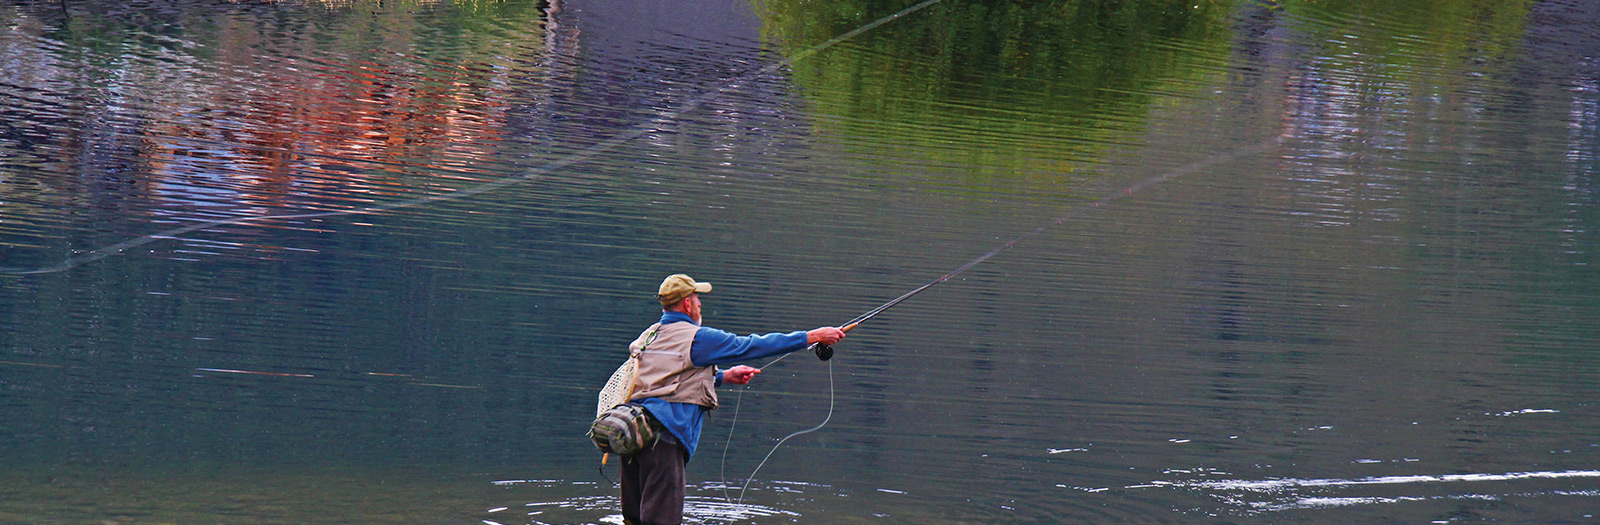 fly fishing in vail